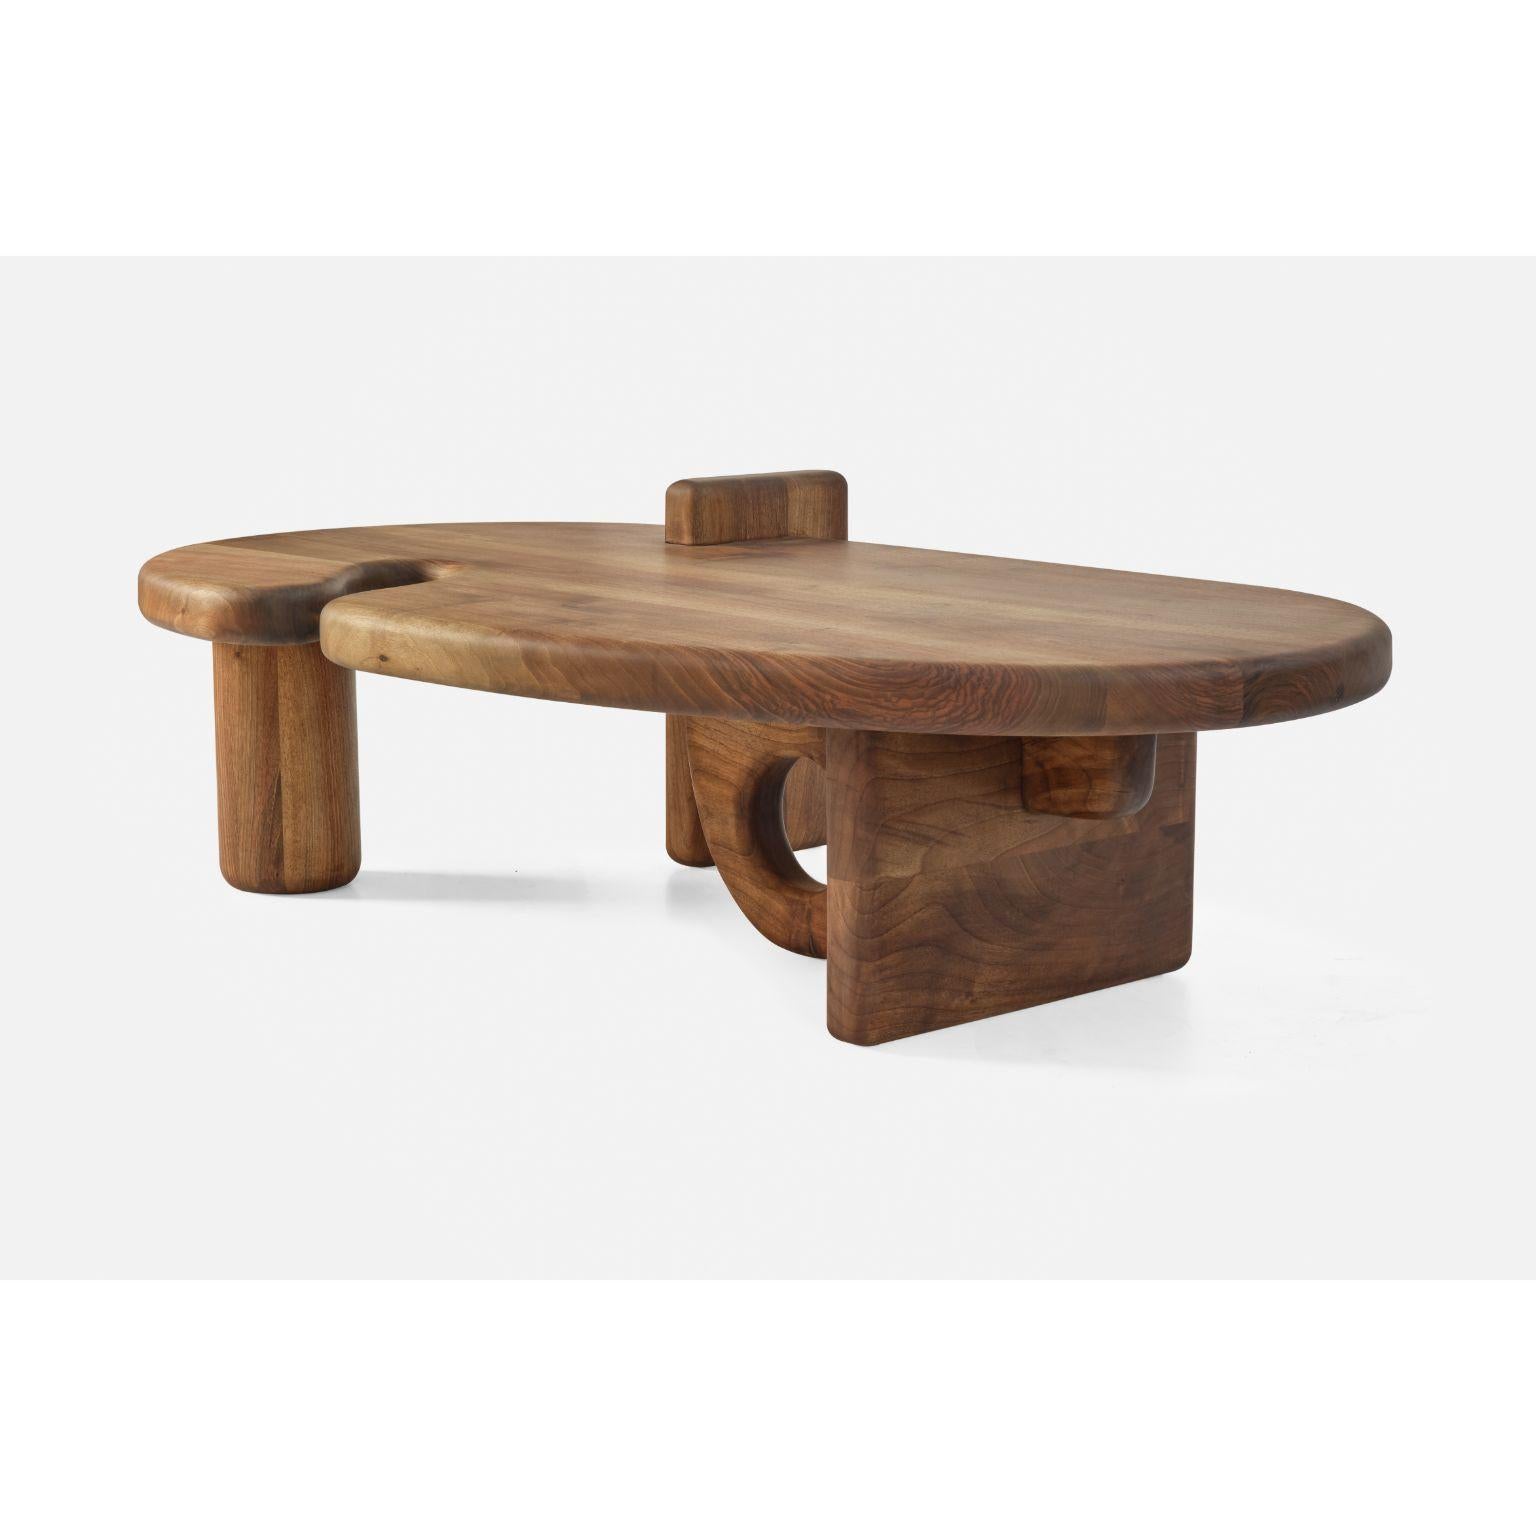 Turkish Selge Low Table by Contemporary Ecowood For Sale